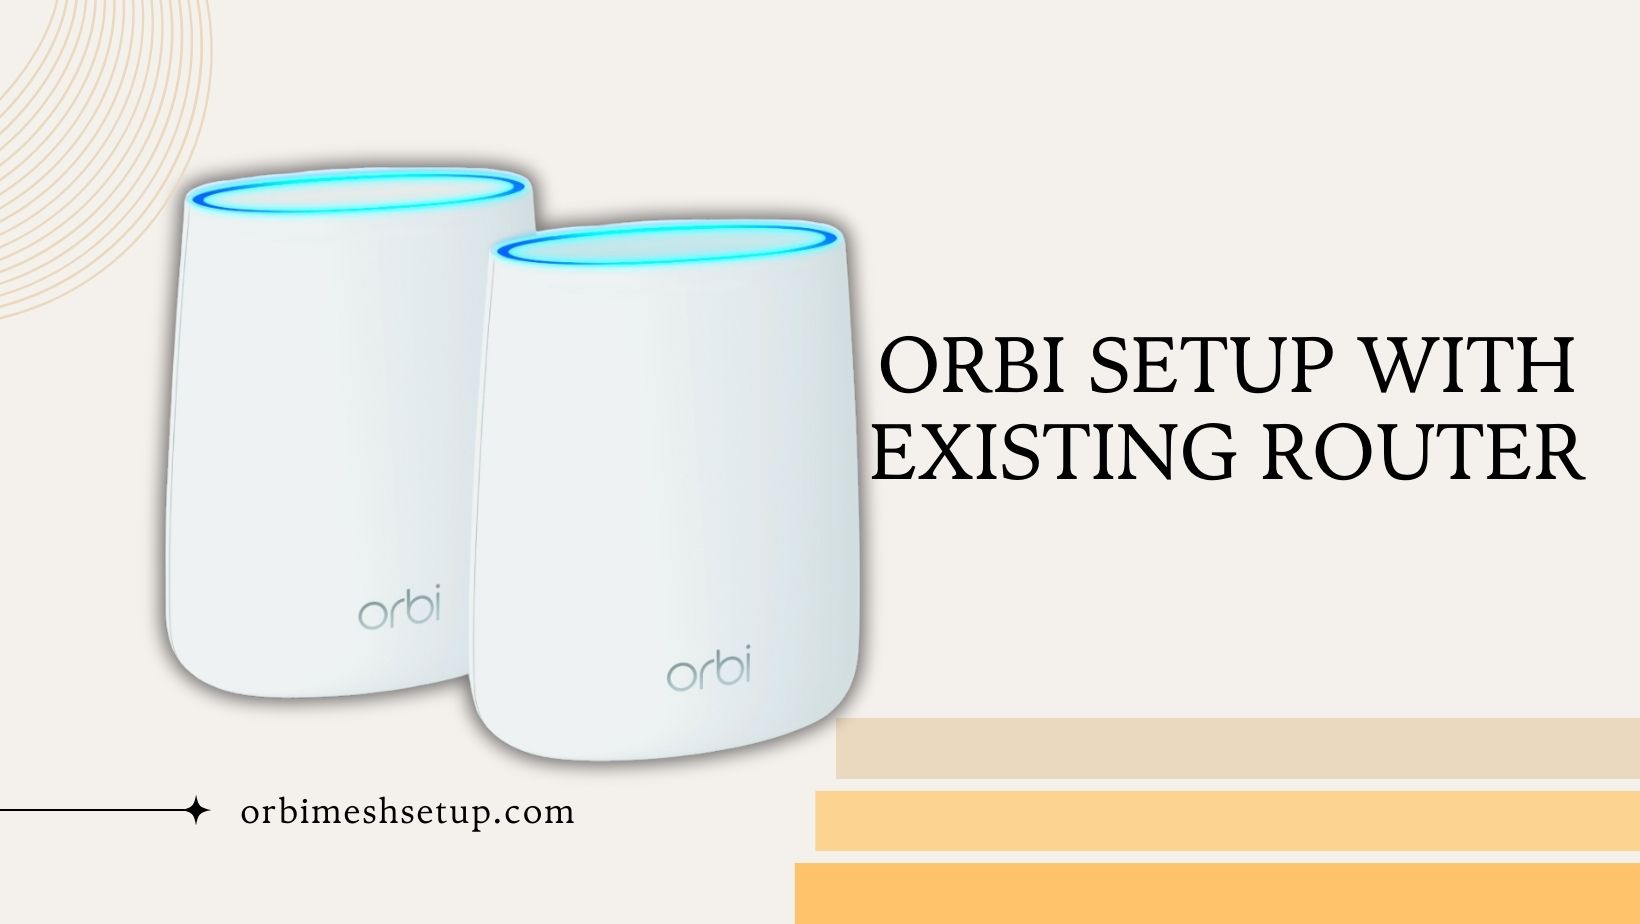 You are currently viewing Orbi Setup with Existing Router